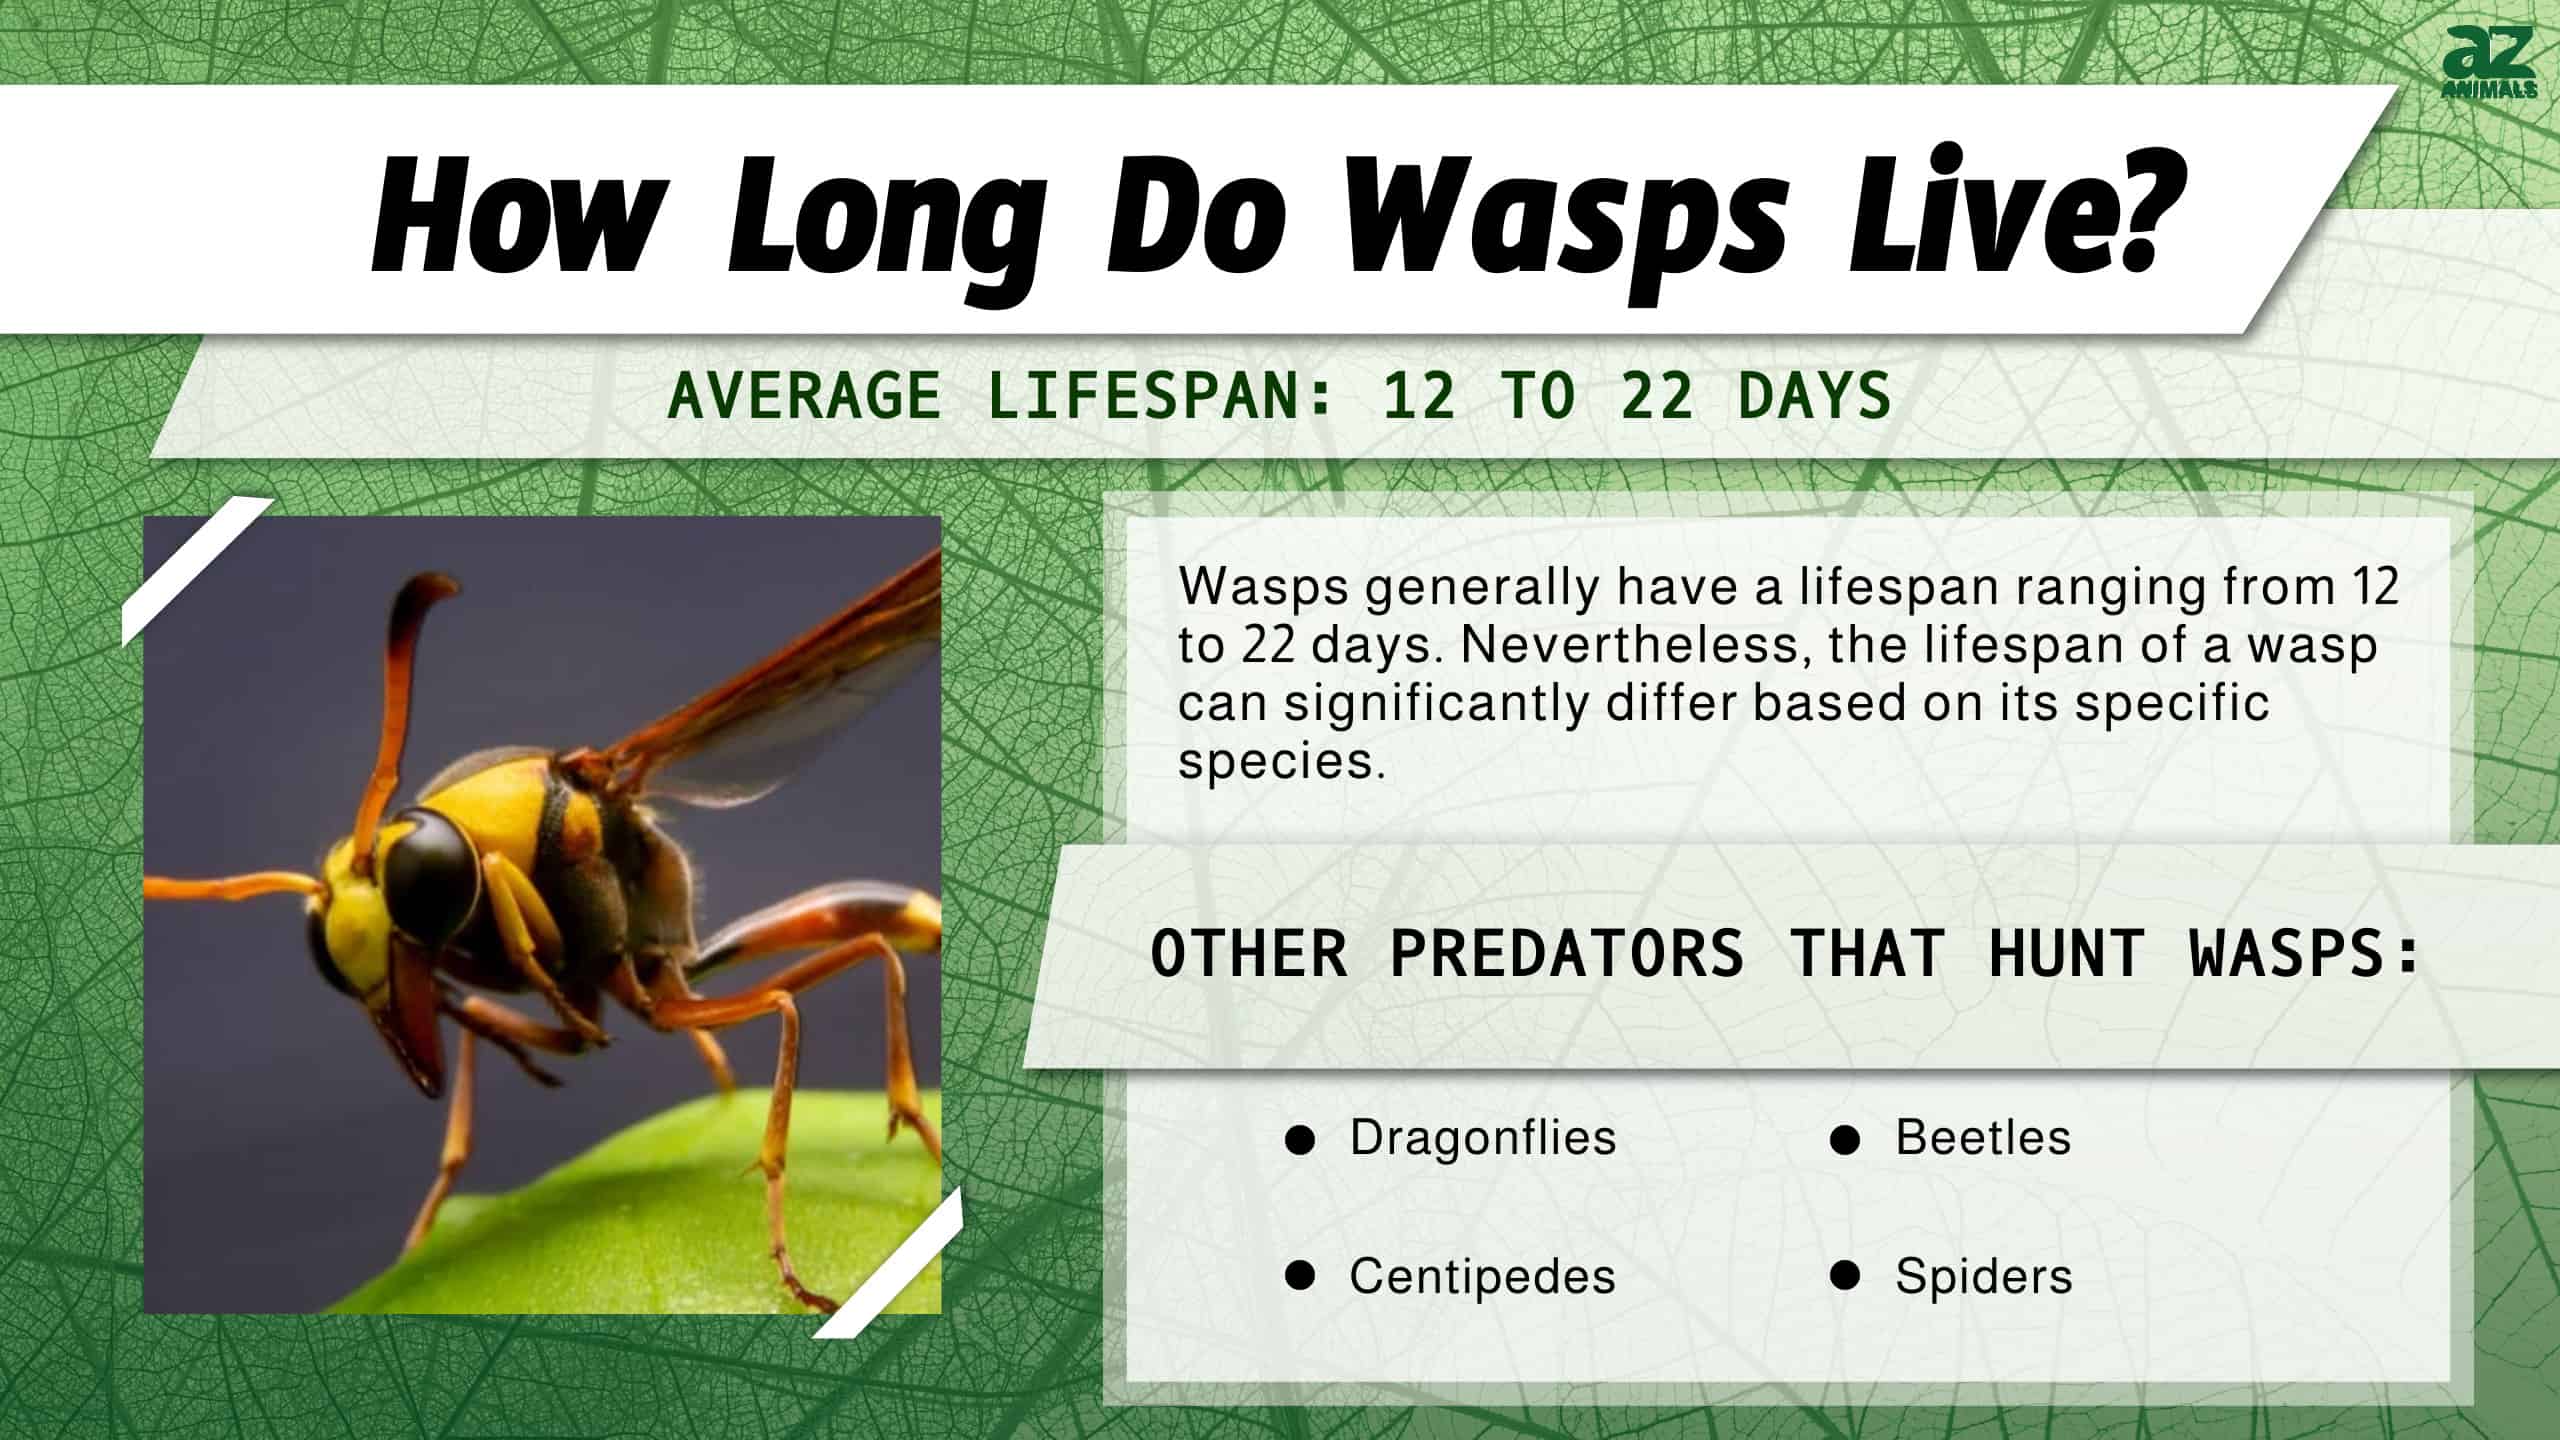 How Long Do Wasps Live? infographic